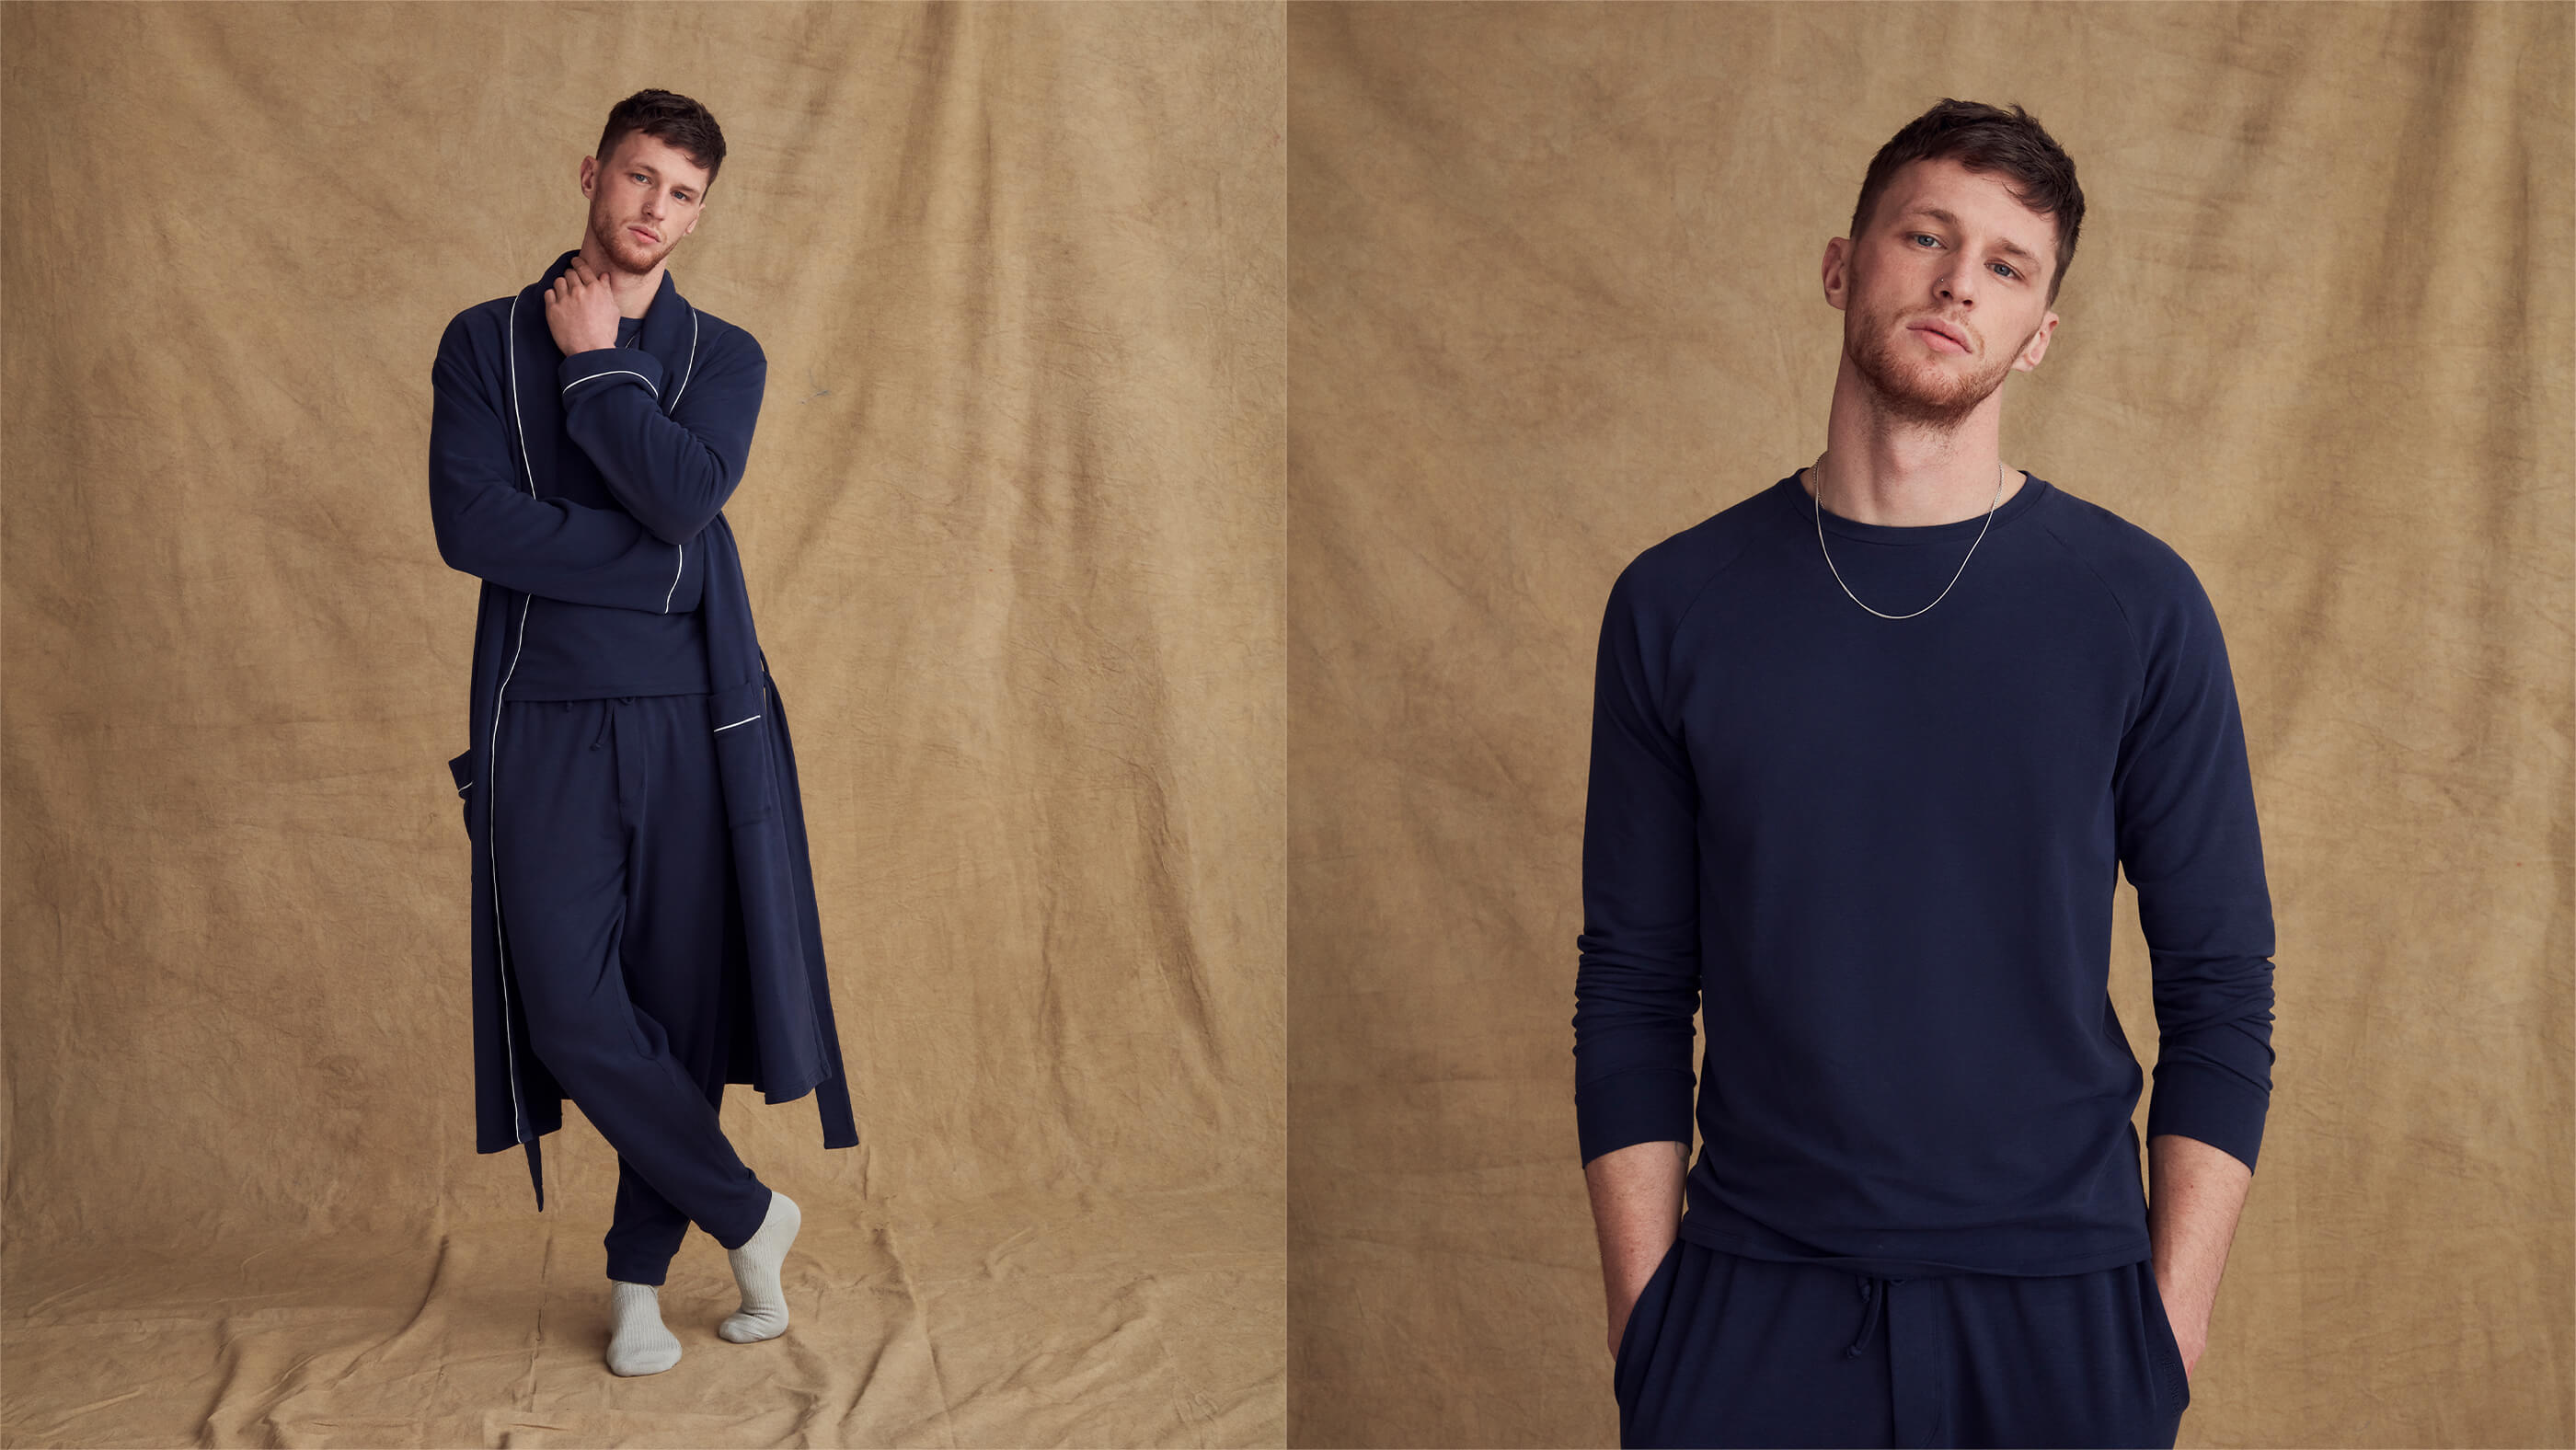 Models wearing navy pyjamas with dressing gown